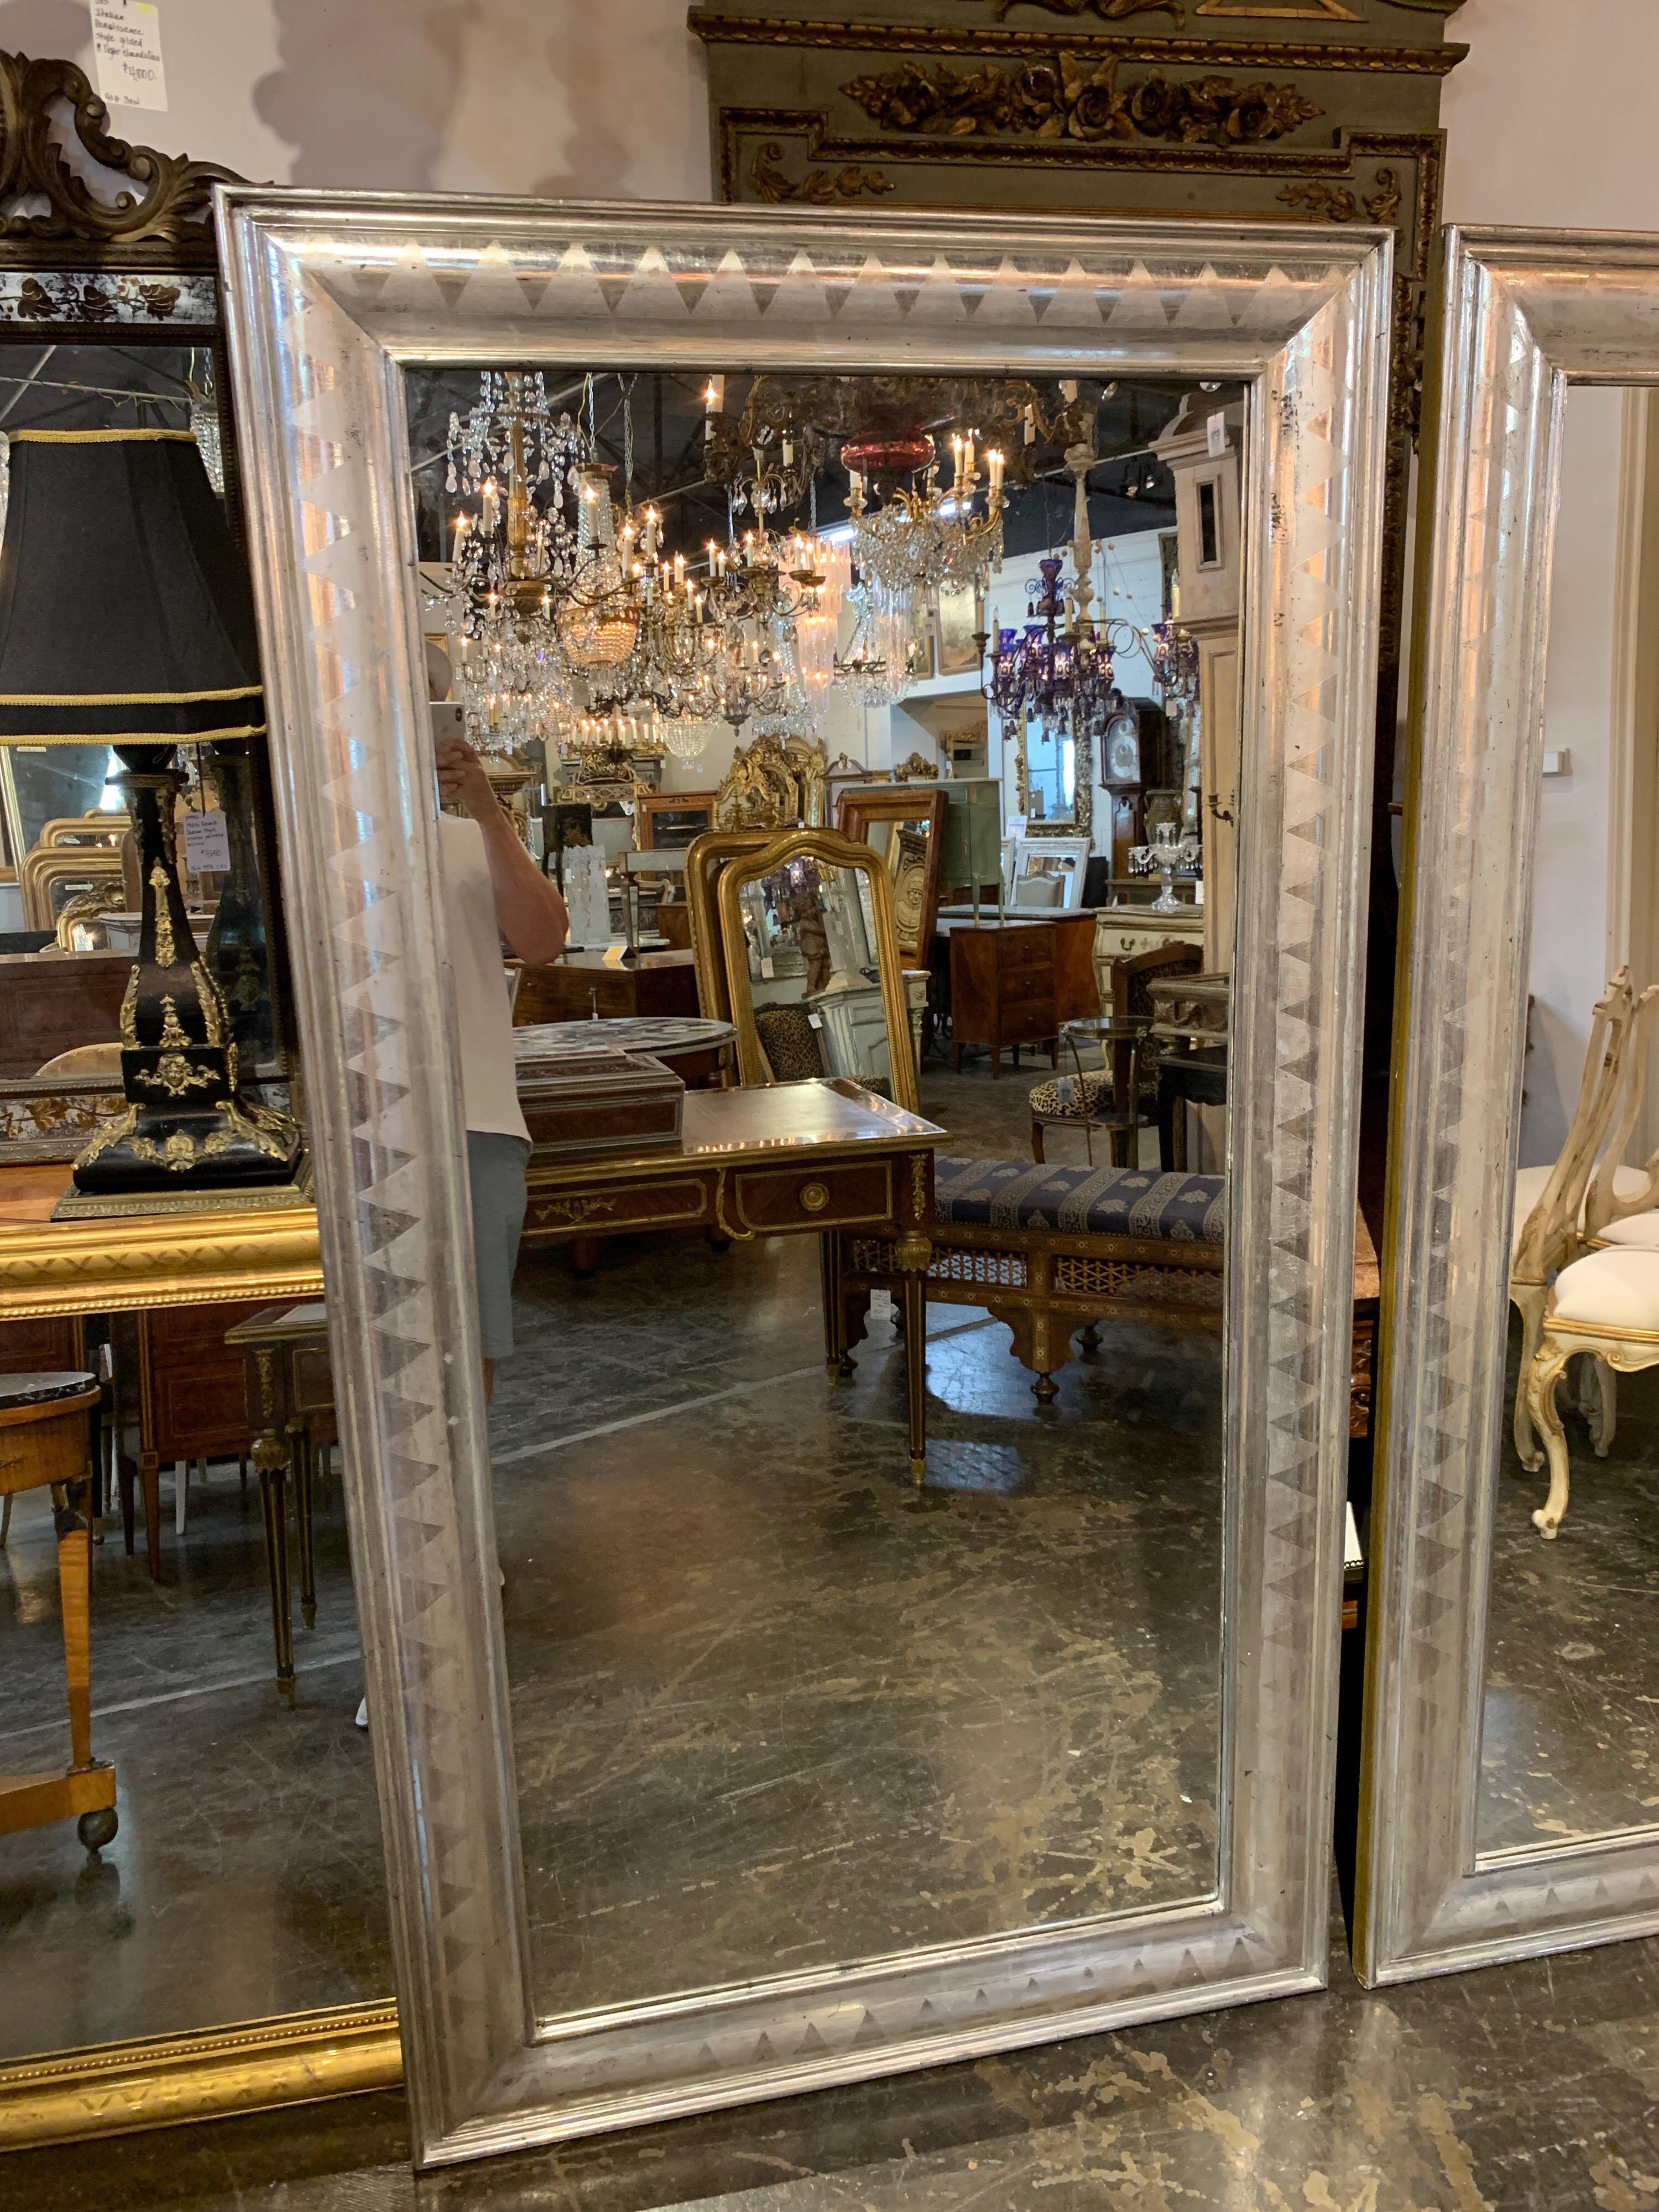 Amazing pair of large French high style silver leaf mirrors. These are absolutely gorgeous. Very impressive for a large space.